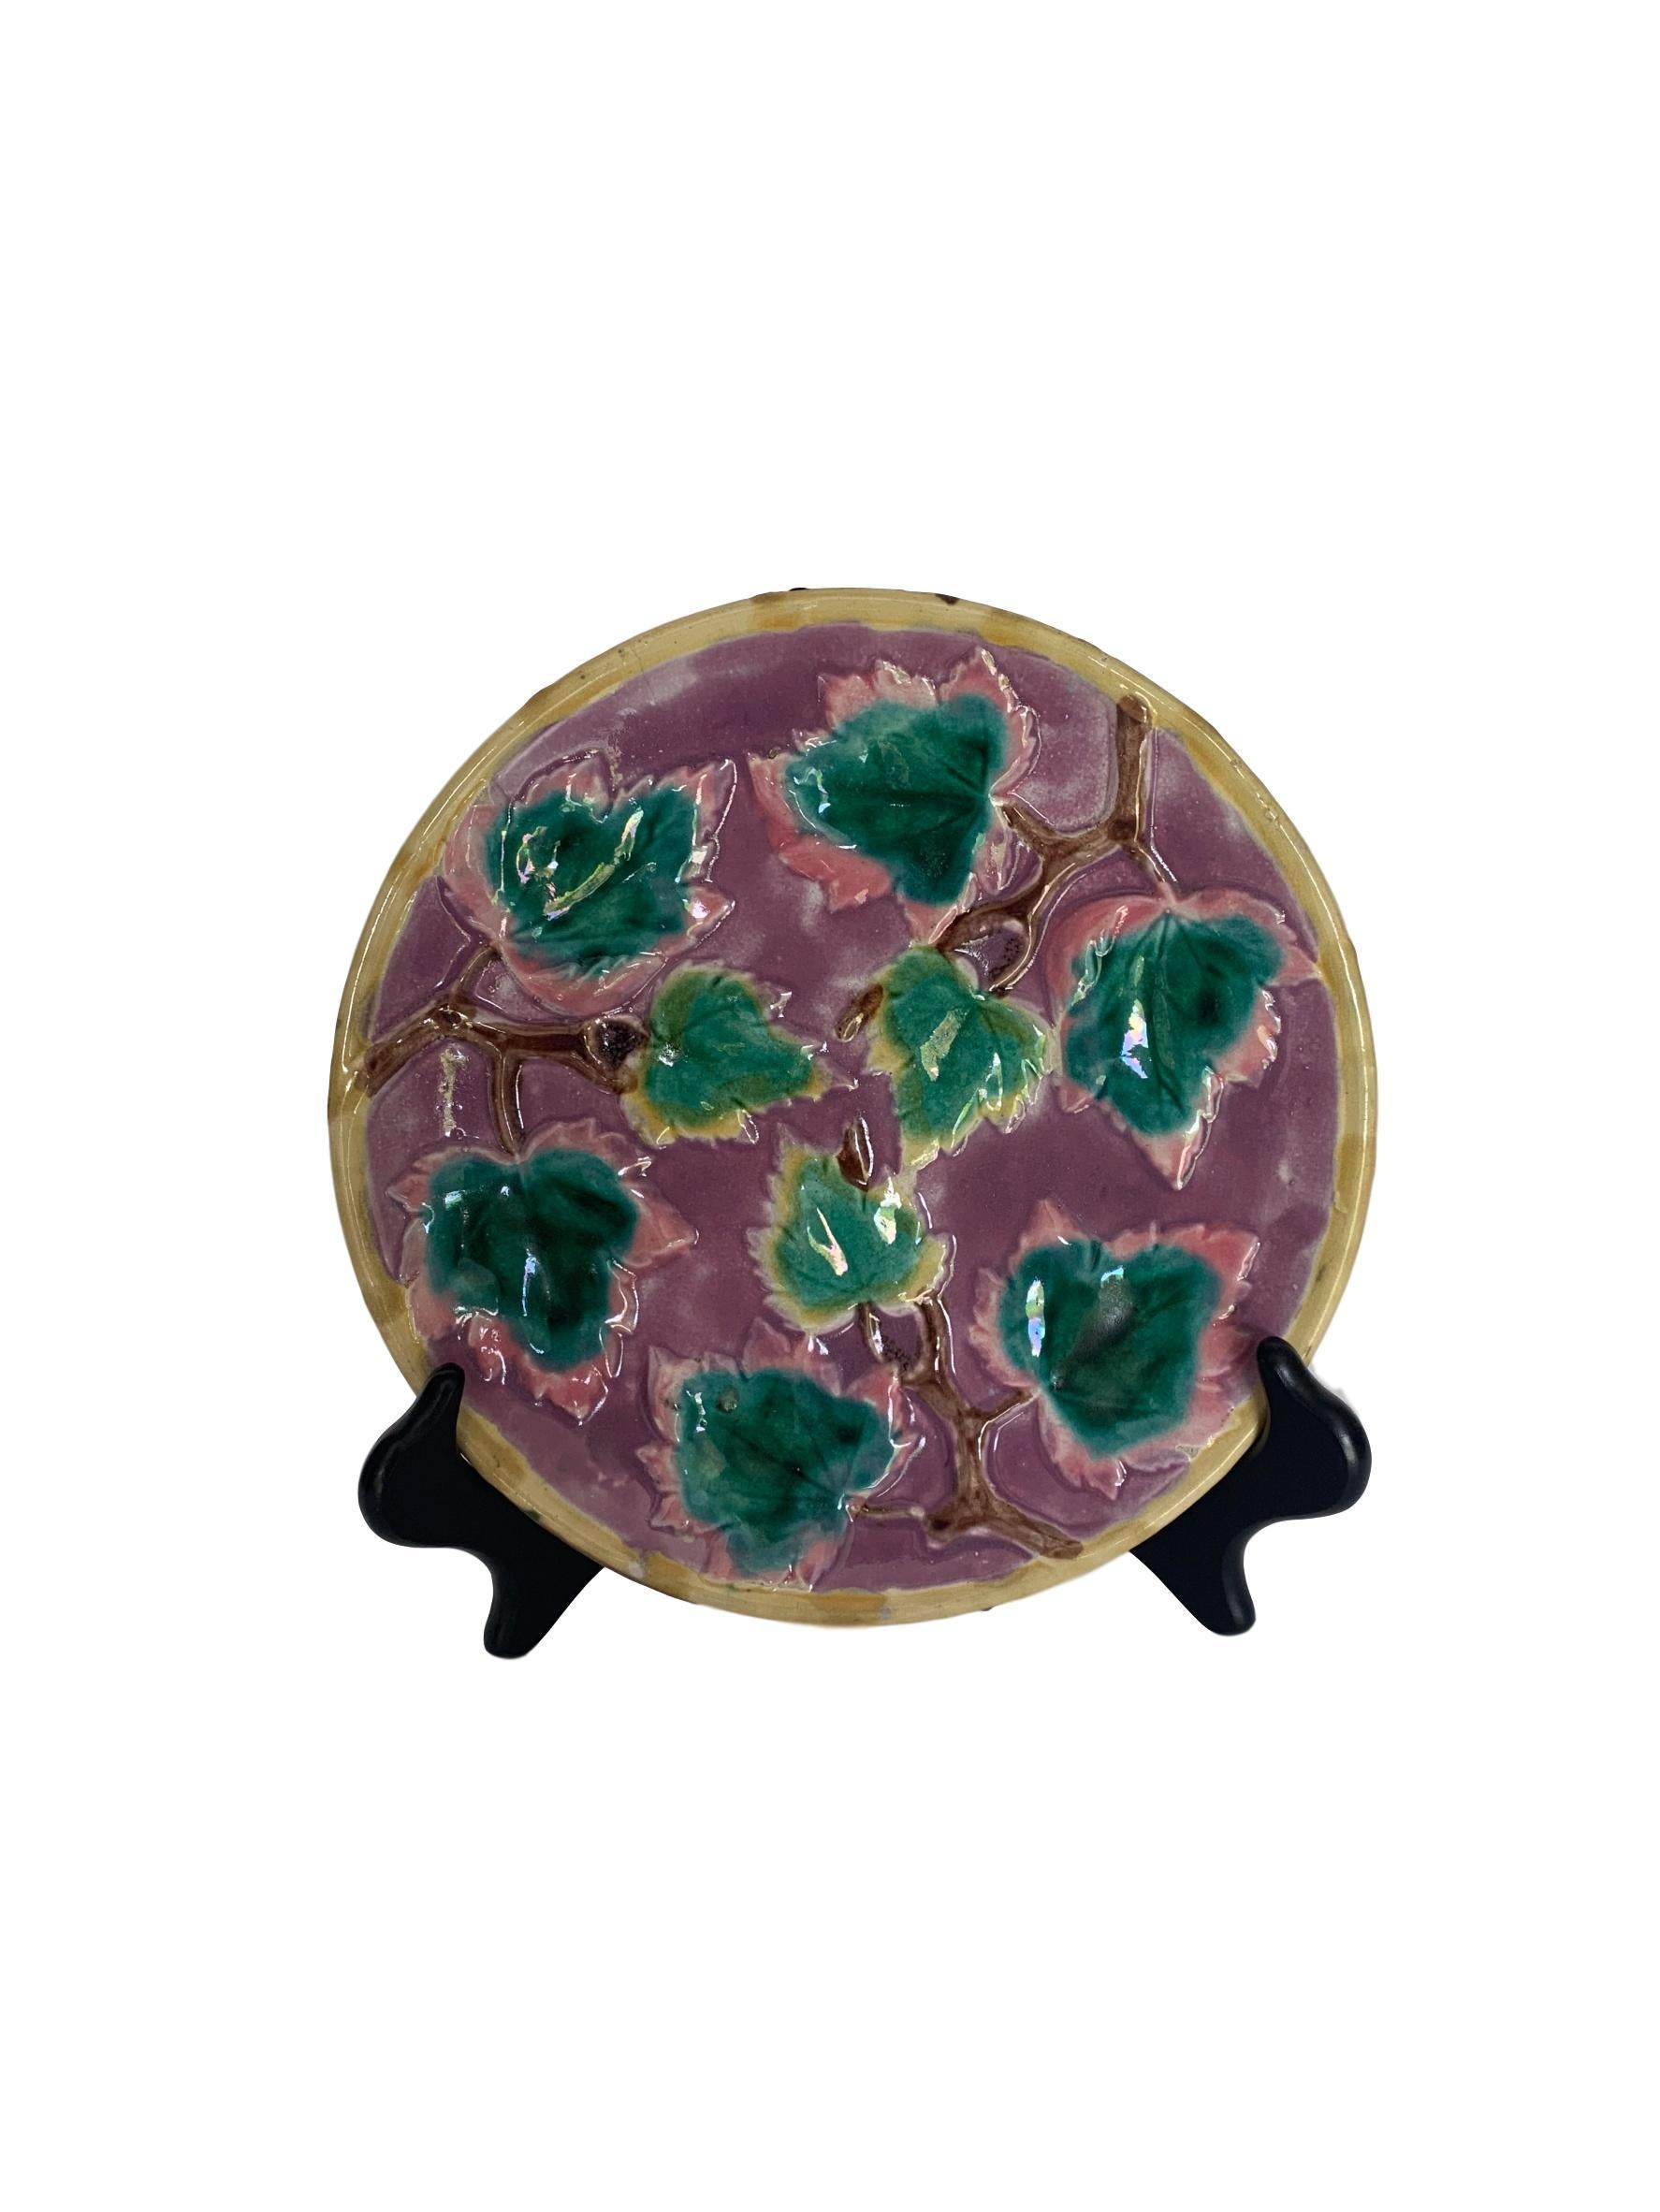 Etruscan Majolica maple leaf plate on purple ground, by Griffin, Smith & Hill, American, circa 1880. 

In great condition and excellent coloration.